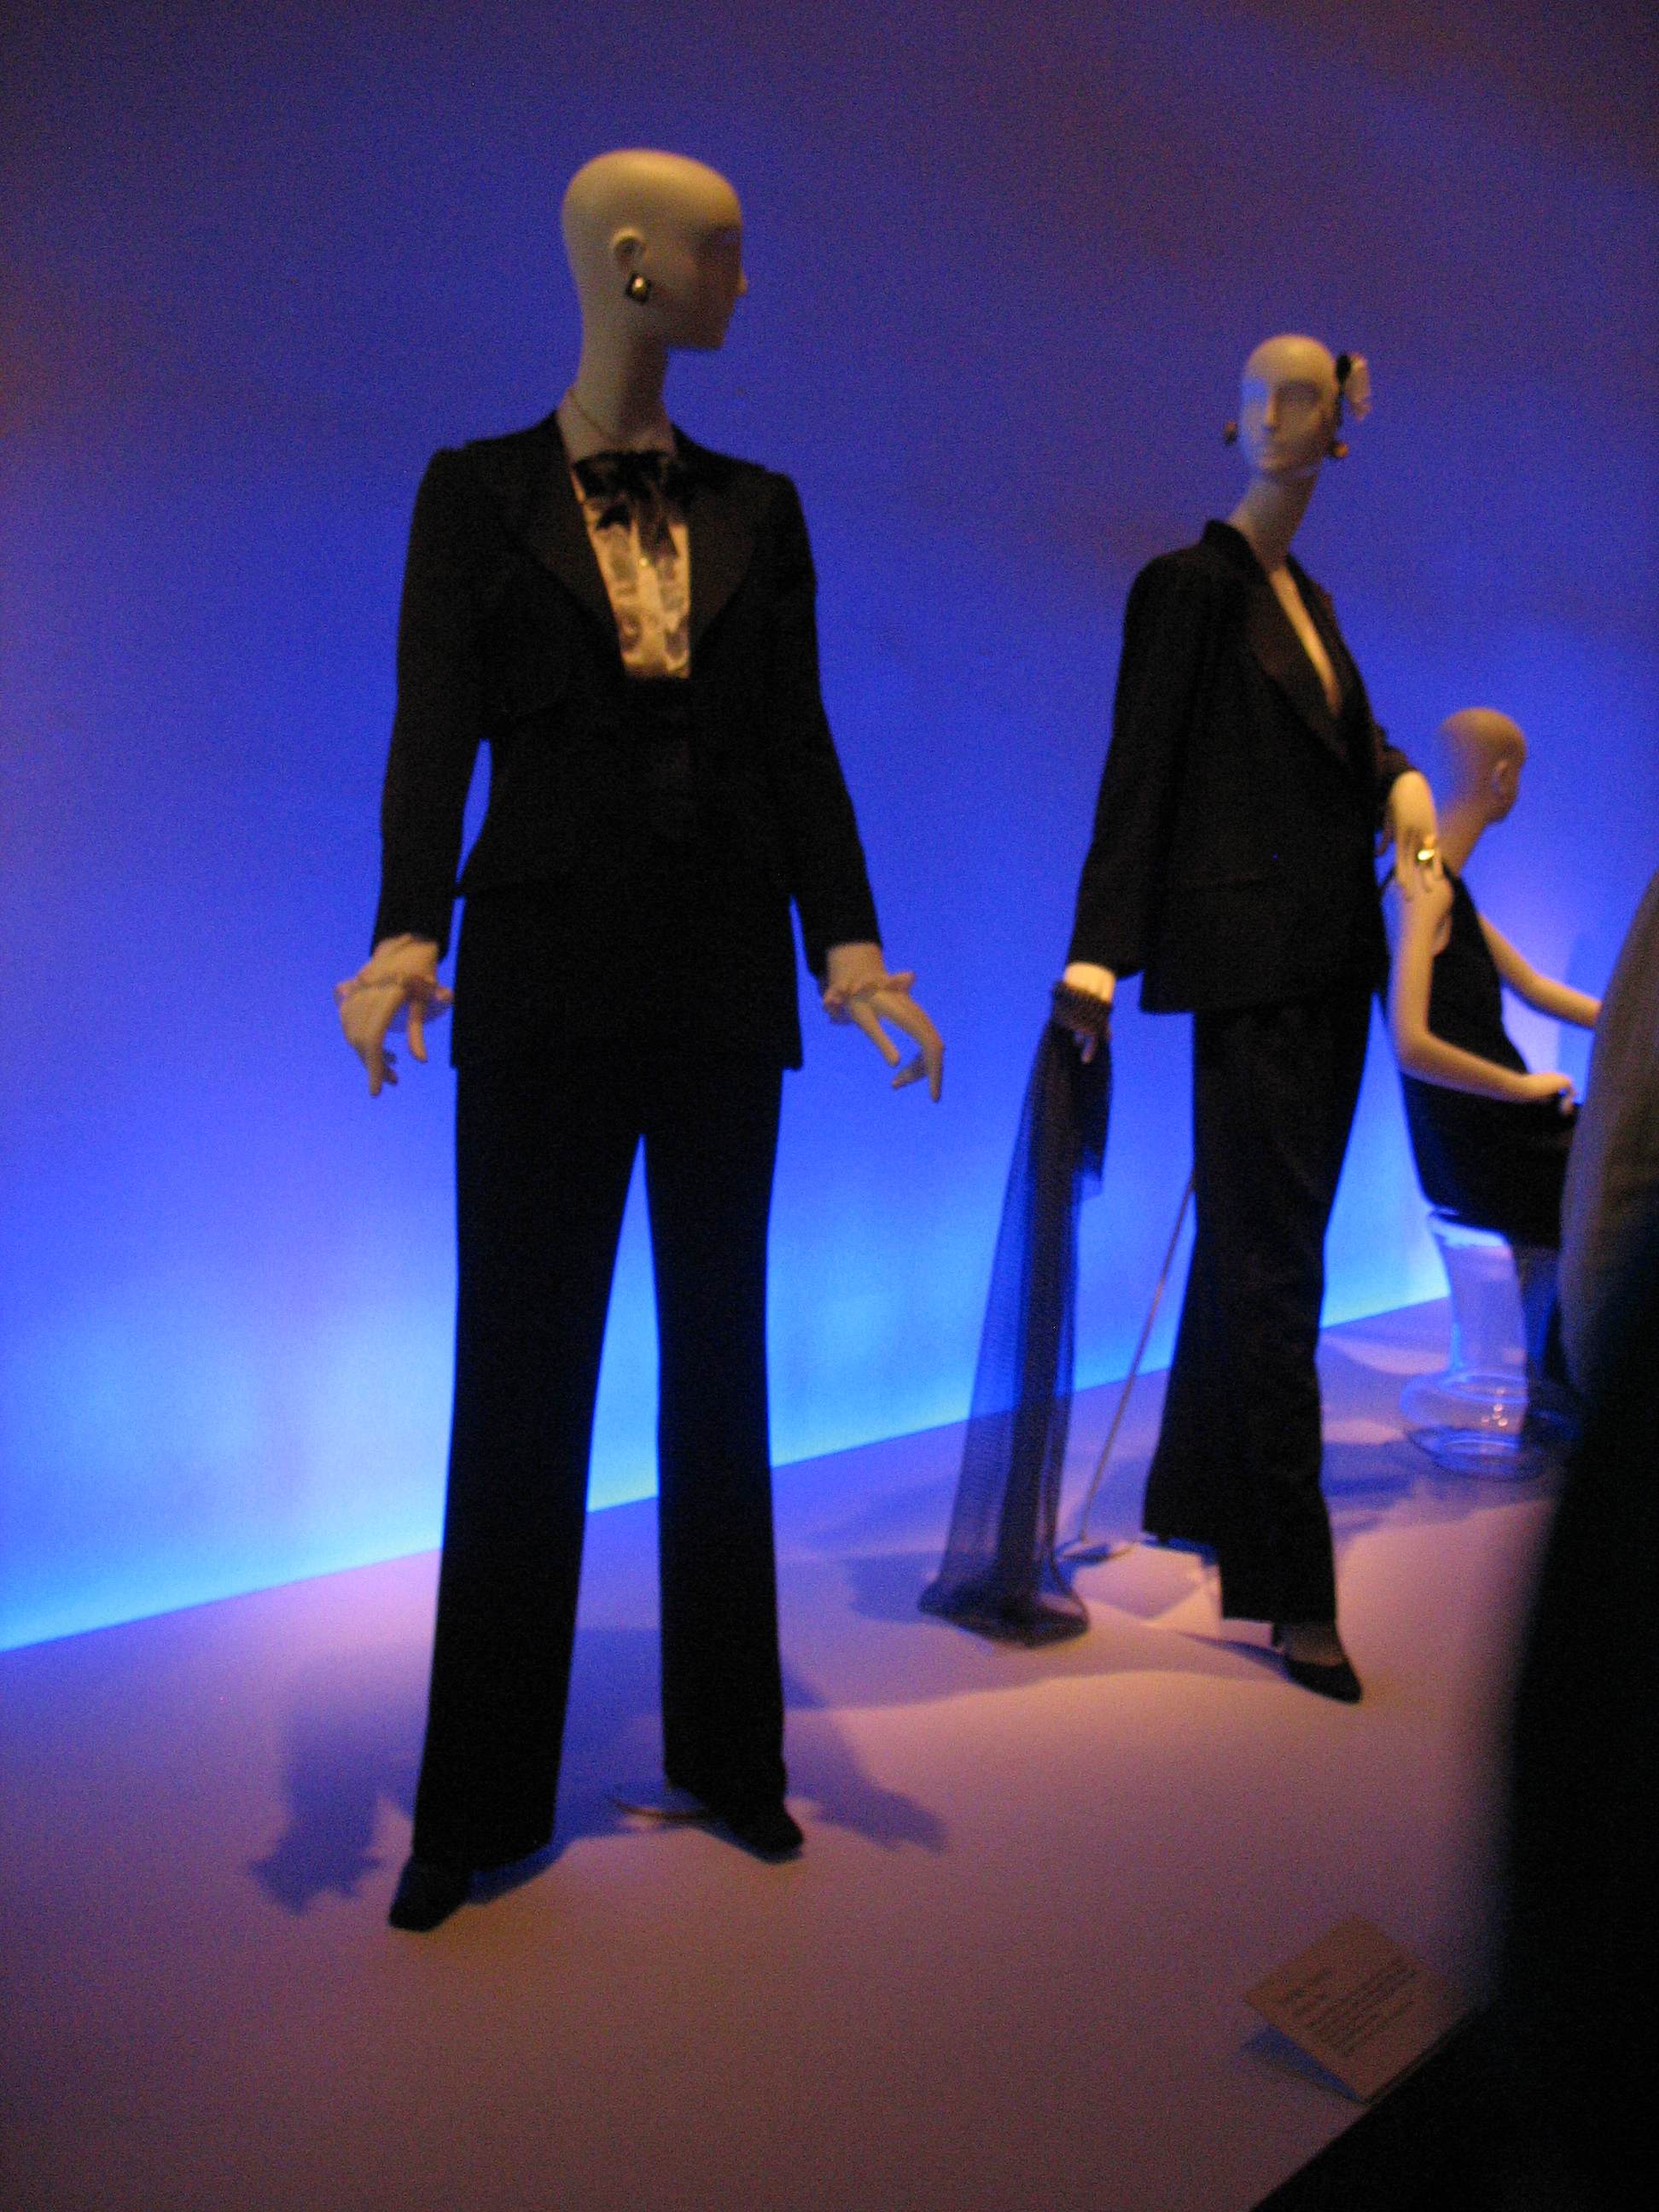 Yves_St_Laurent_le_smoking_at_deYoung_Museum_San_Francisco